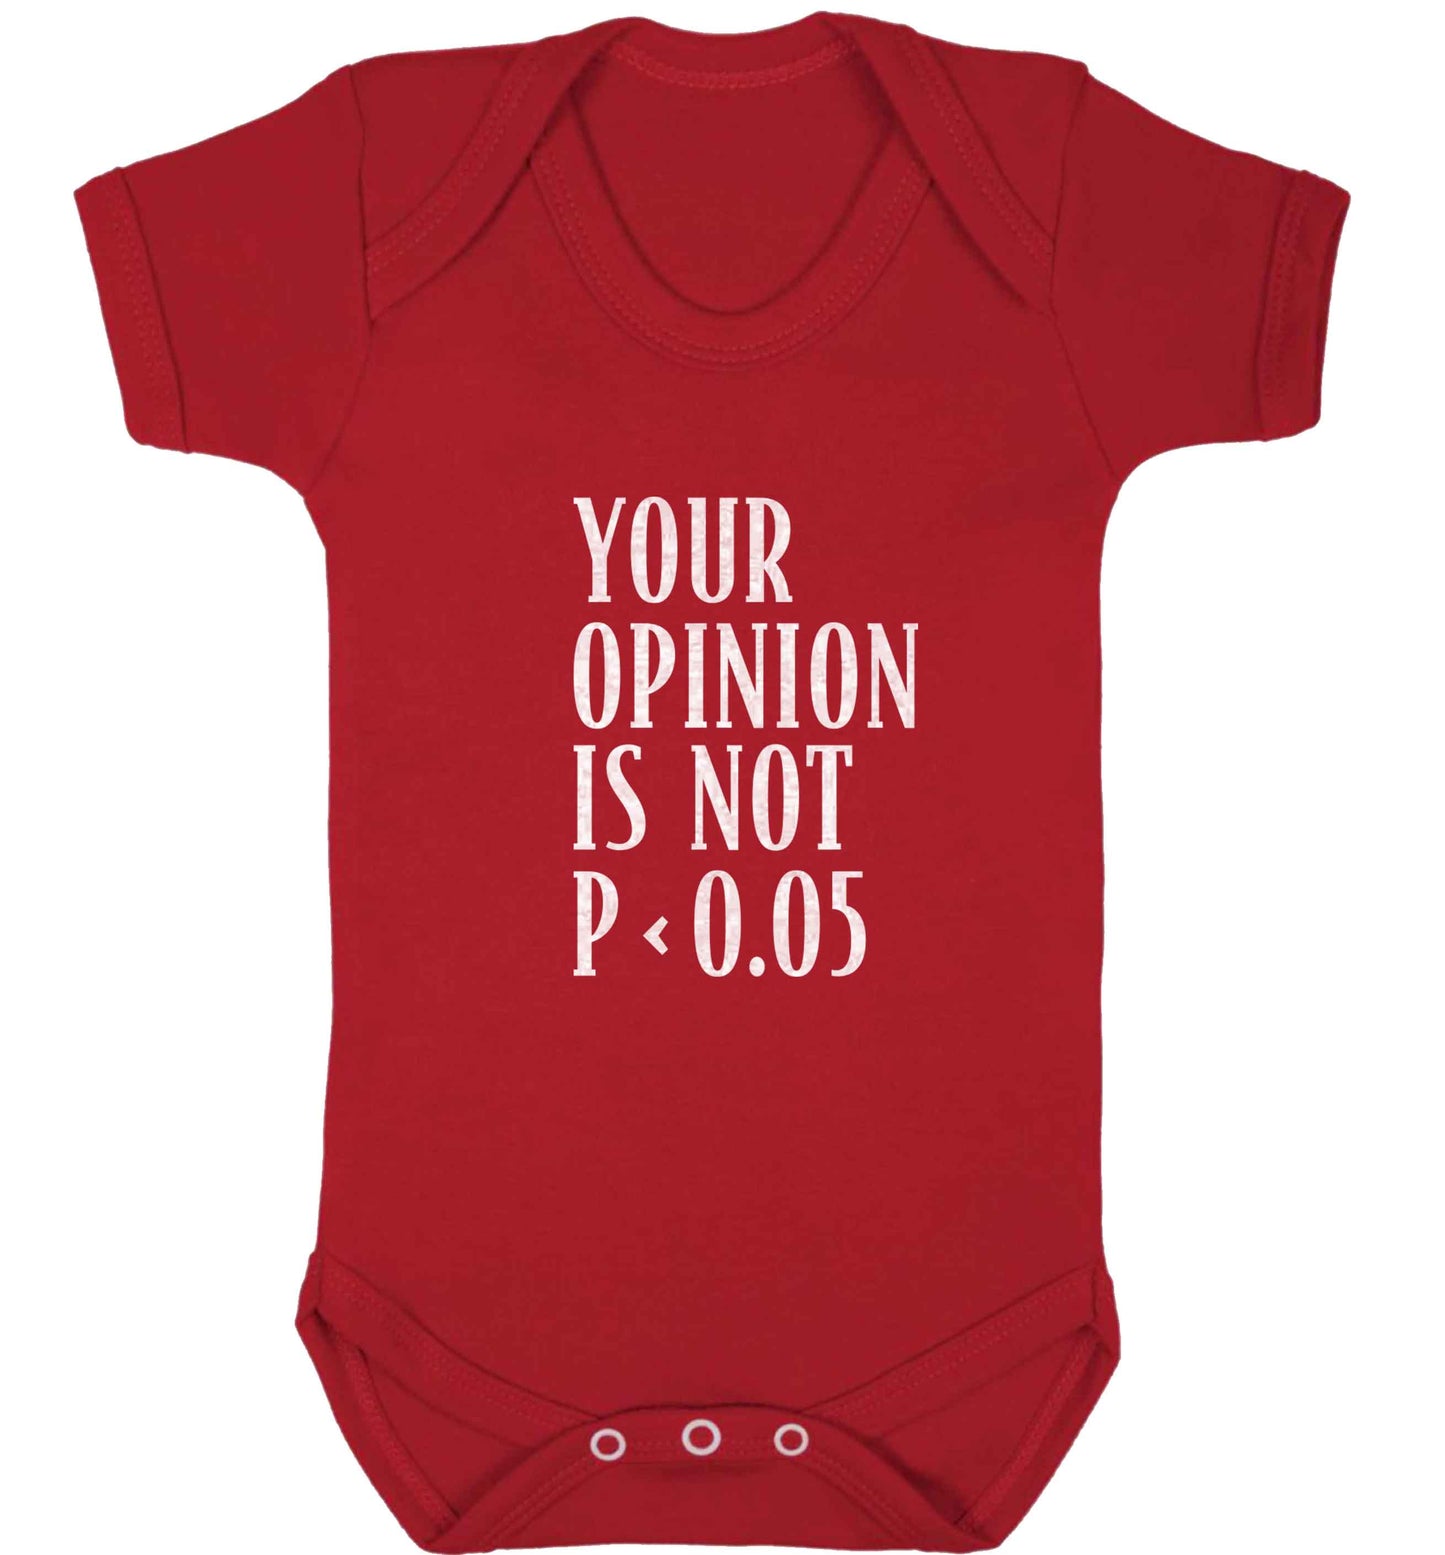 Your opinion is not P < 0.05baby vest red 18-24 months